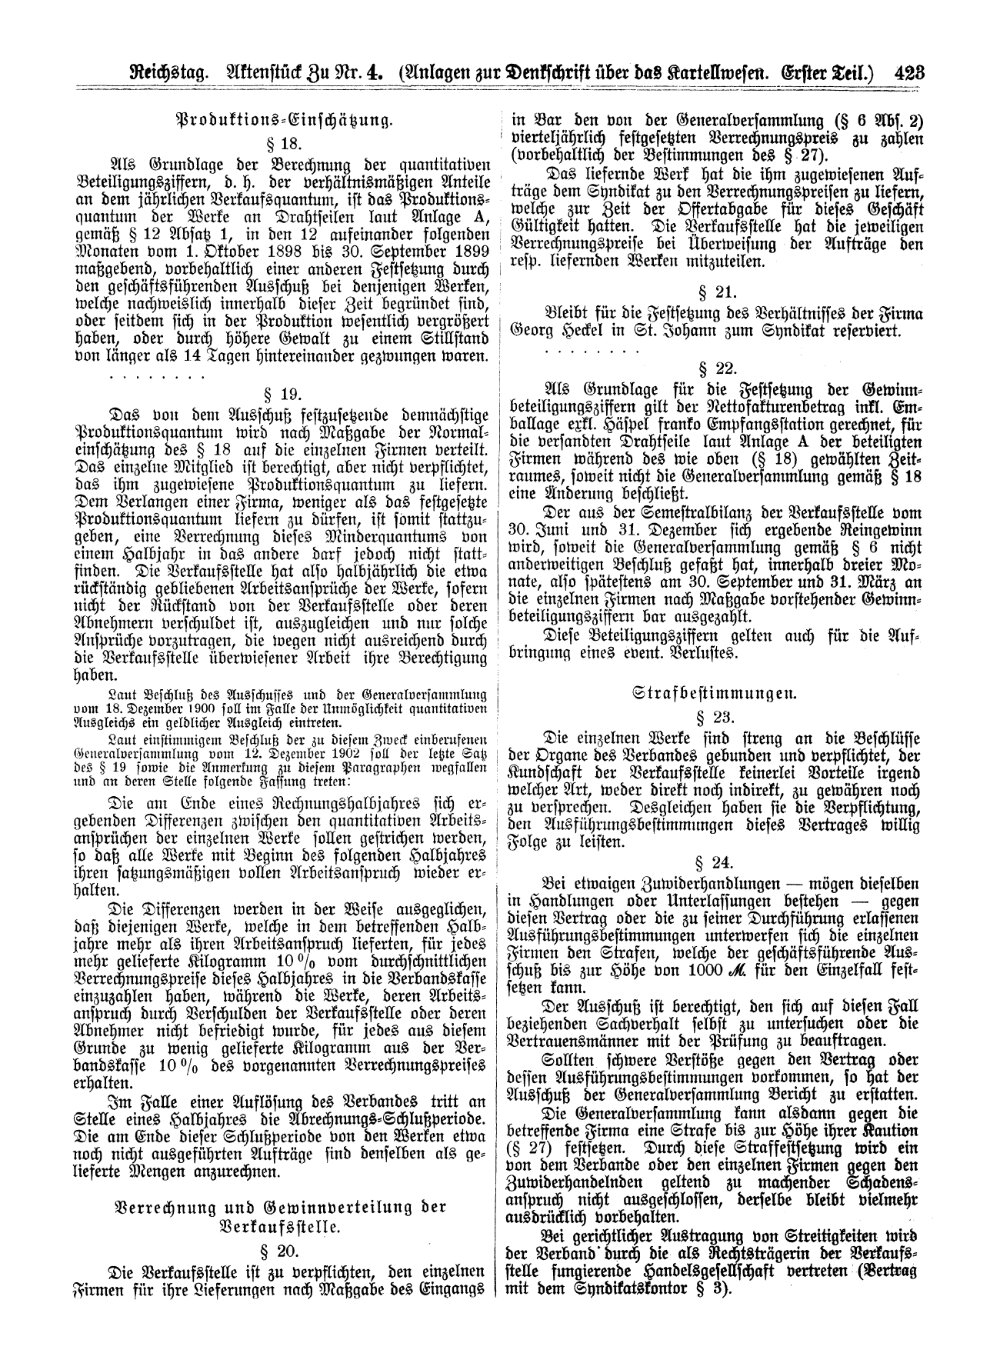 Scan of page 423